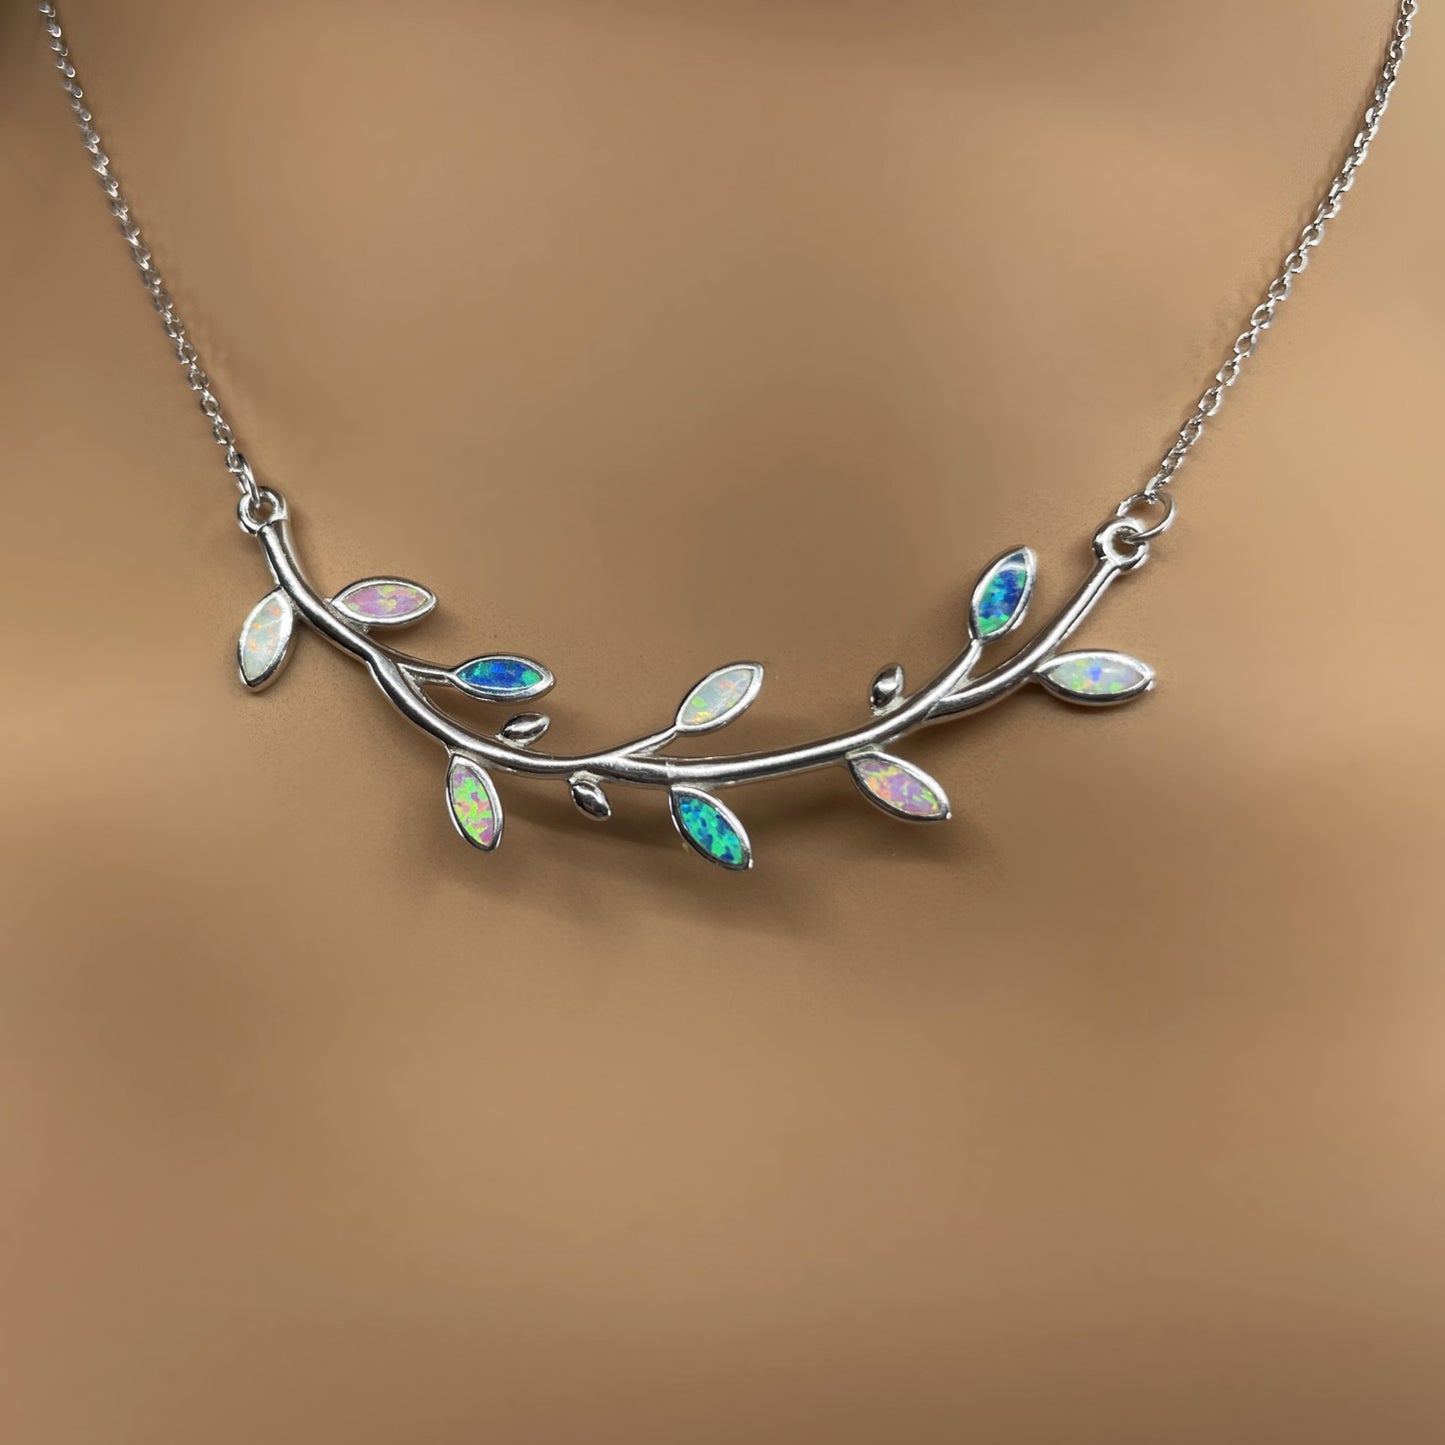 Maile Lei Opalite Necklace